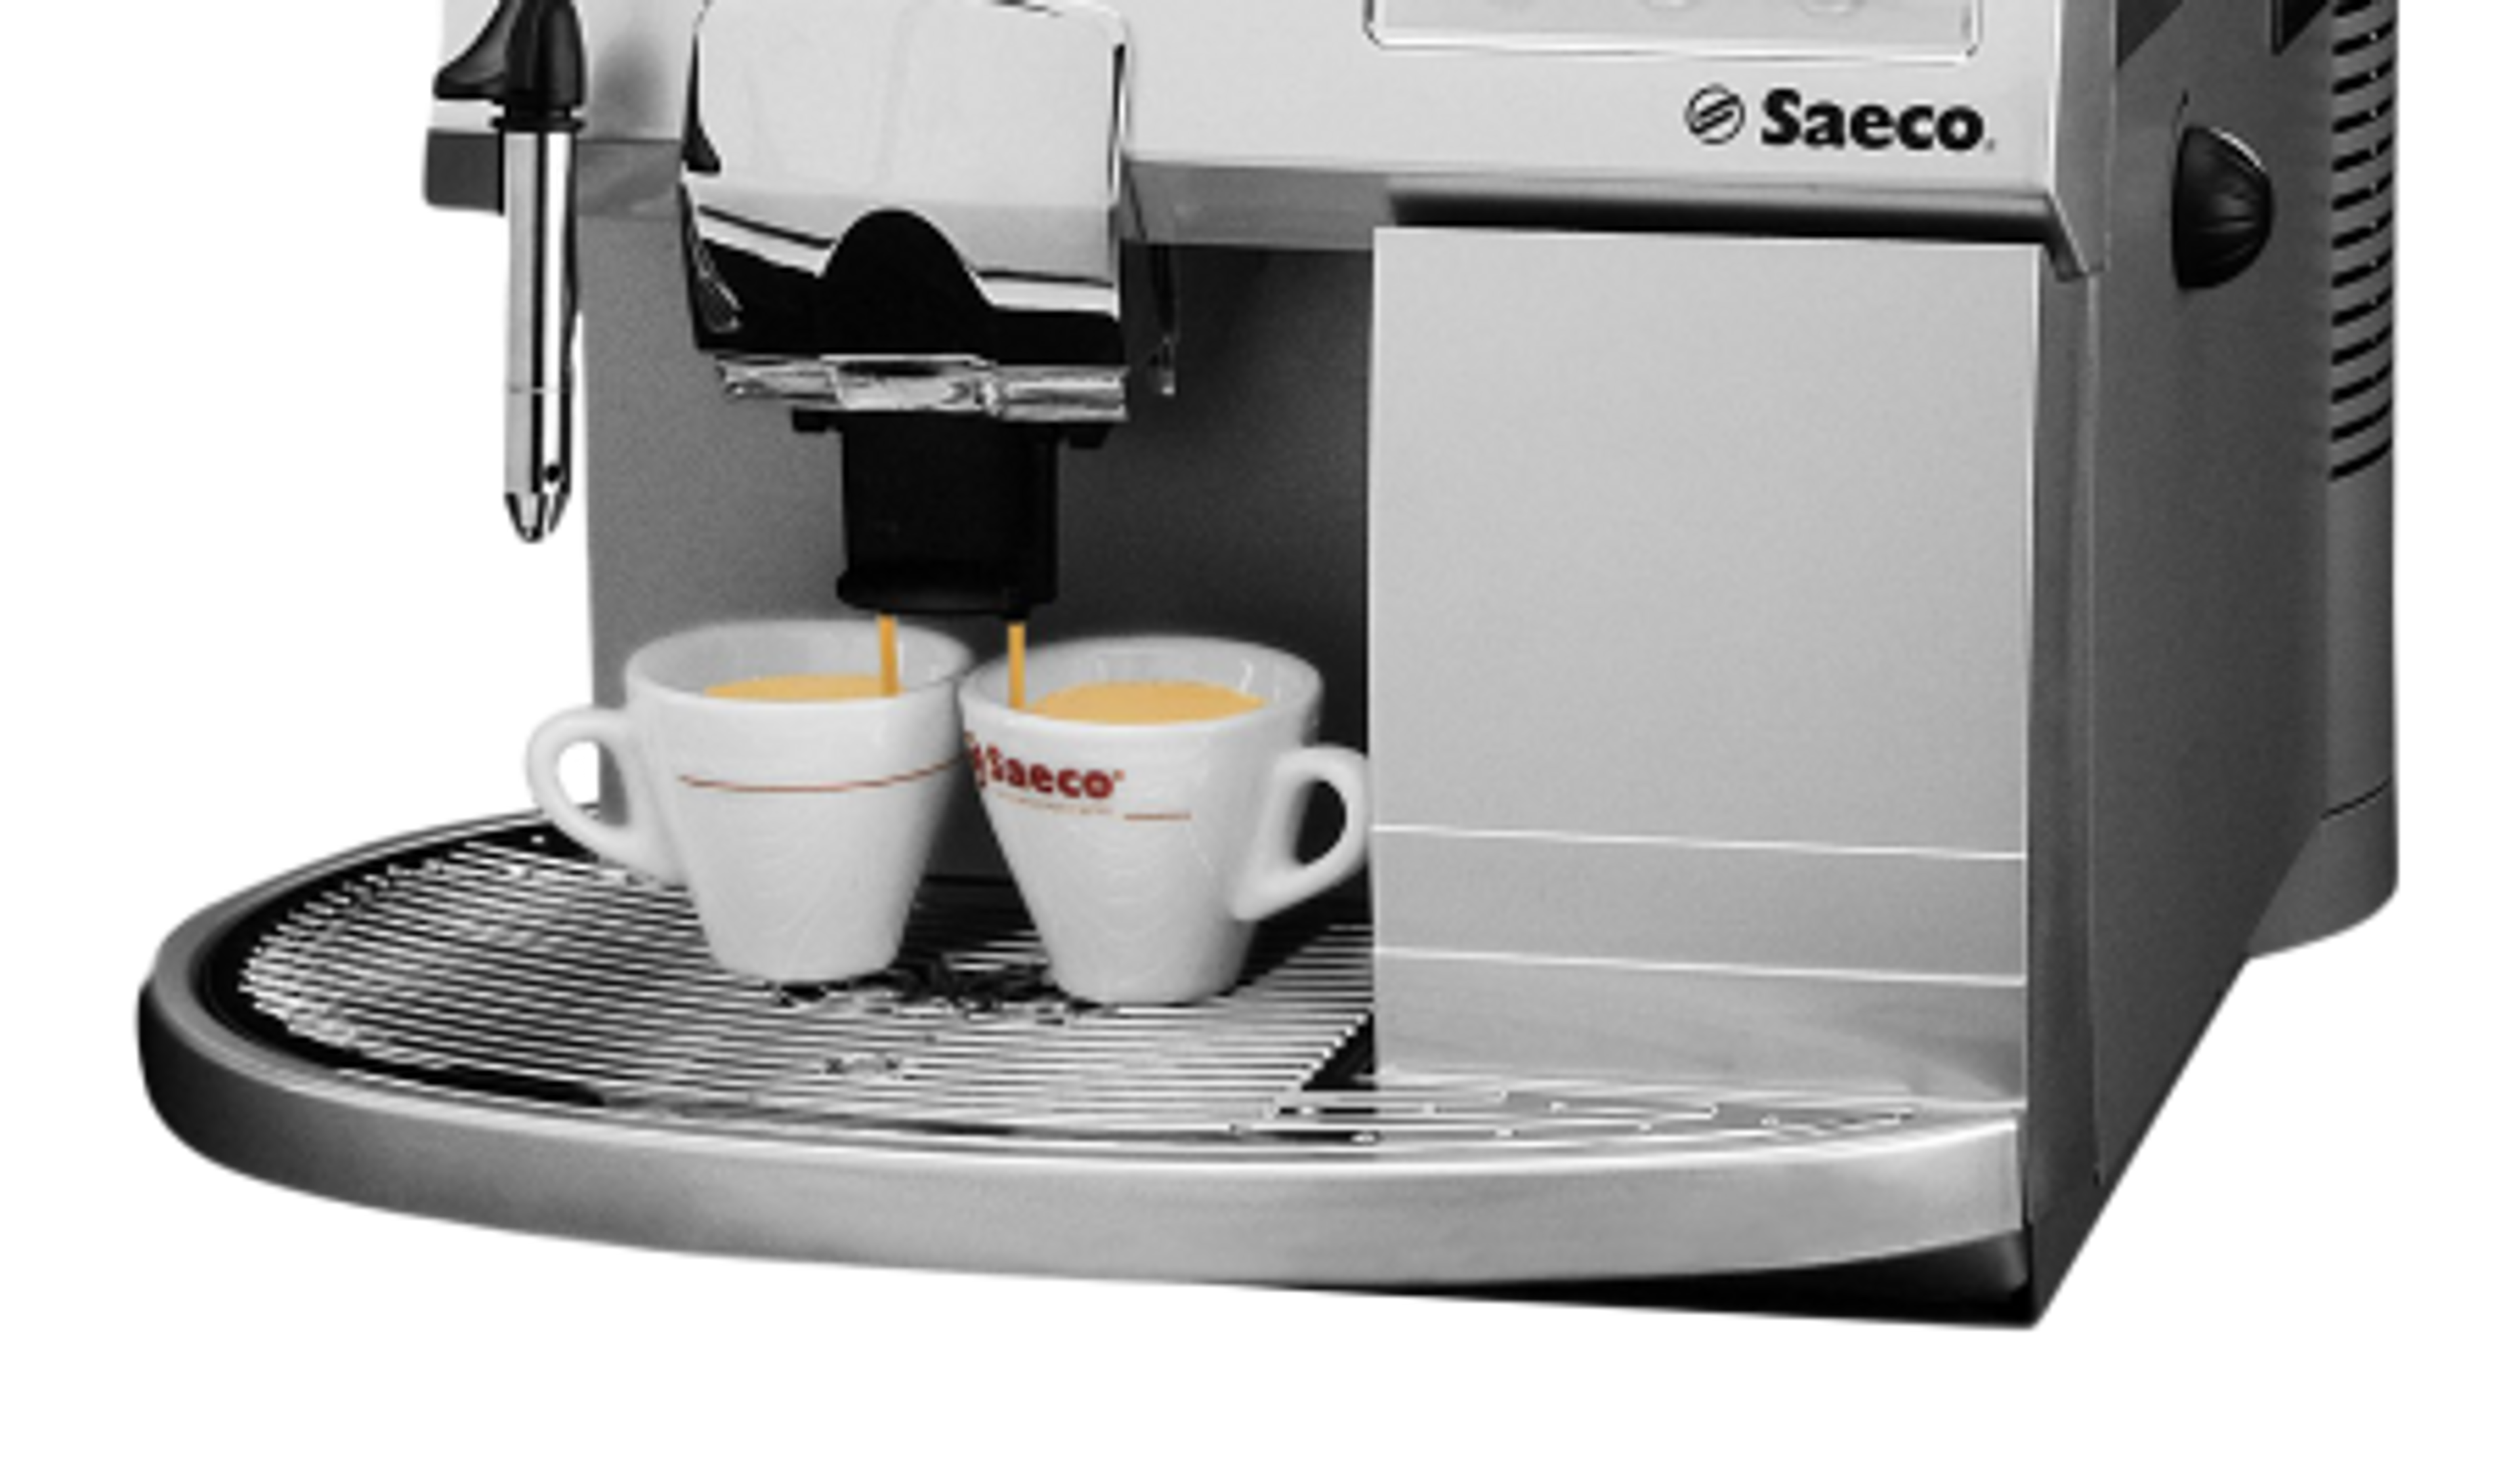 One machine, two cups of exquisite coffee